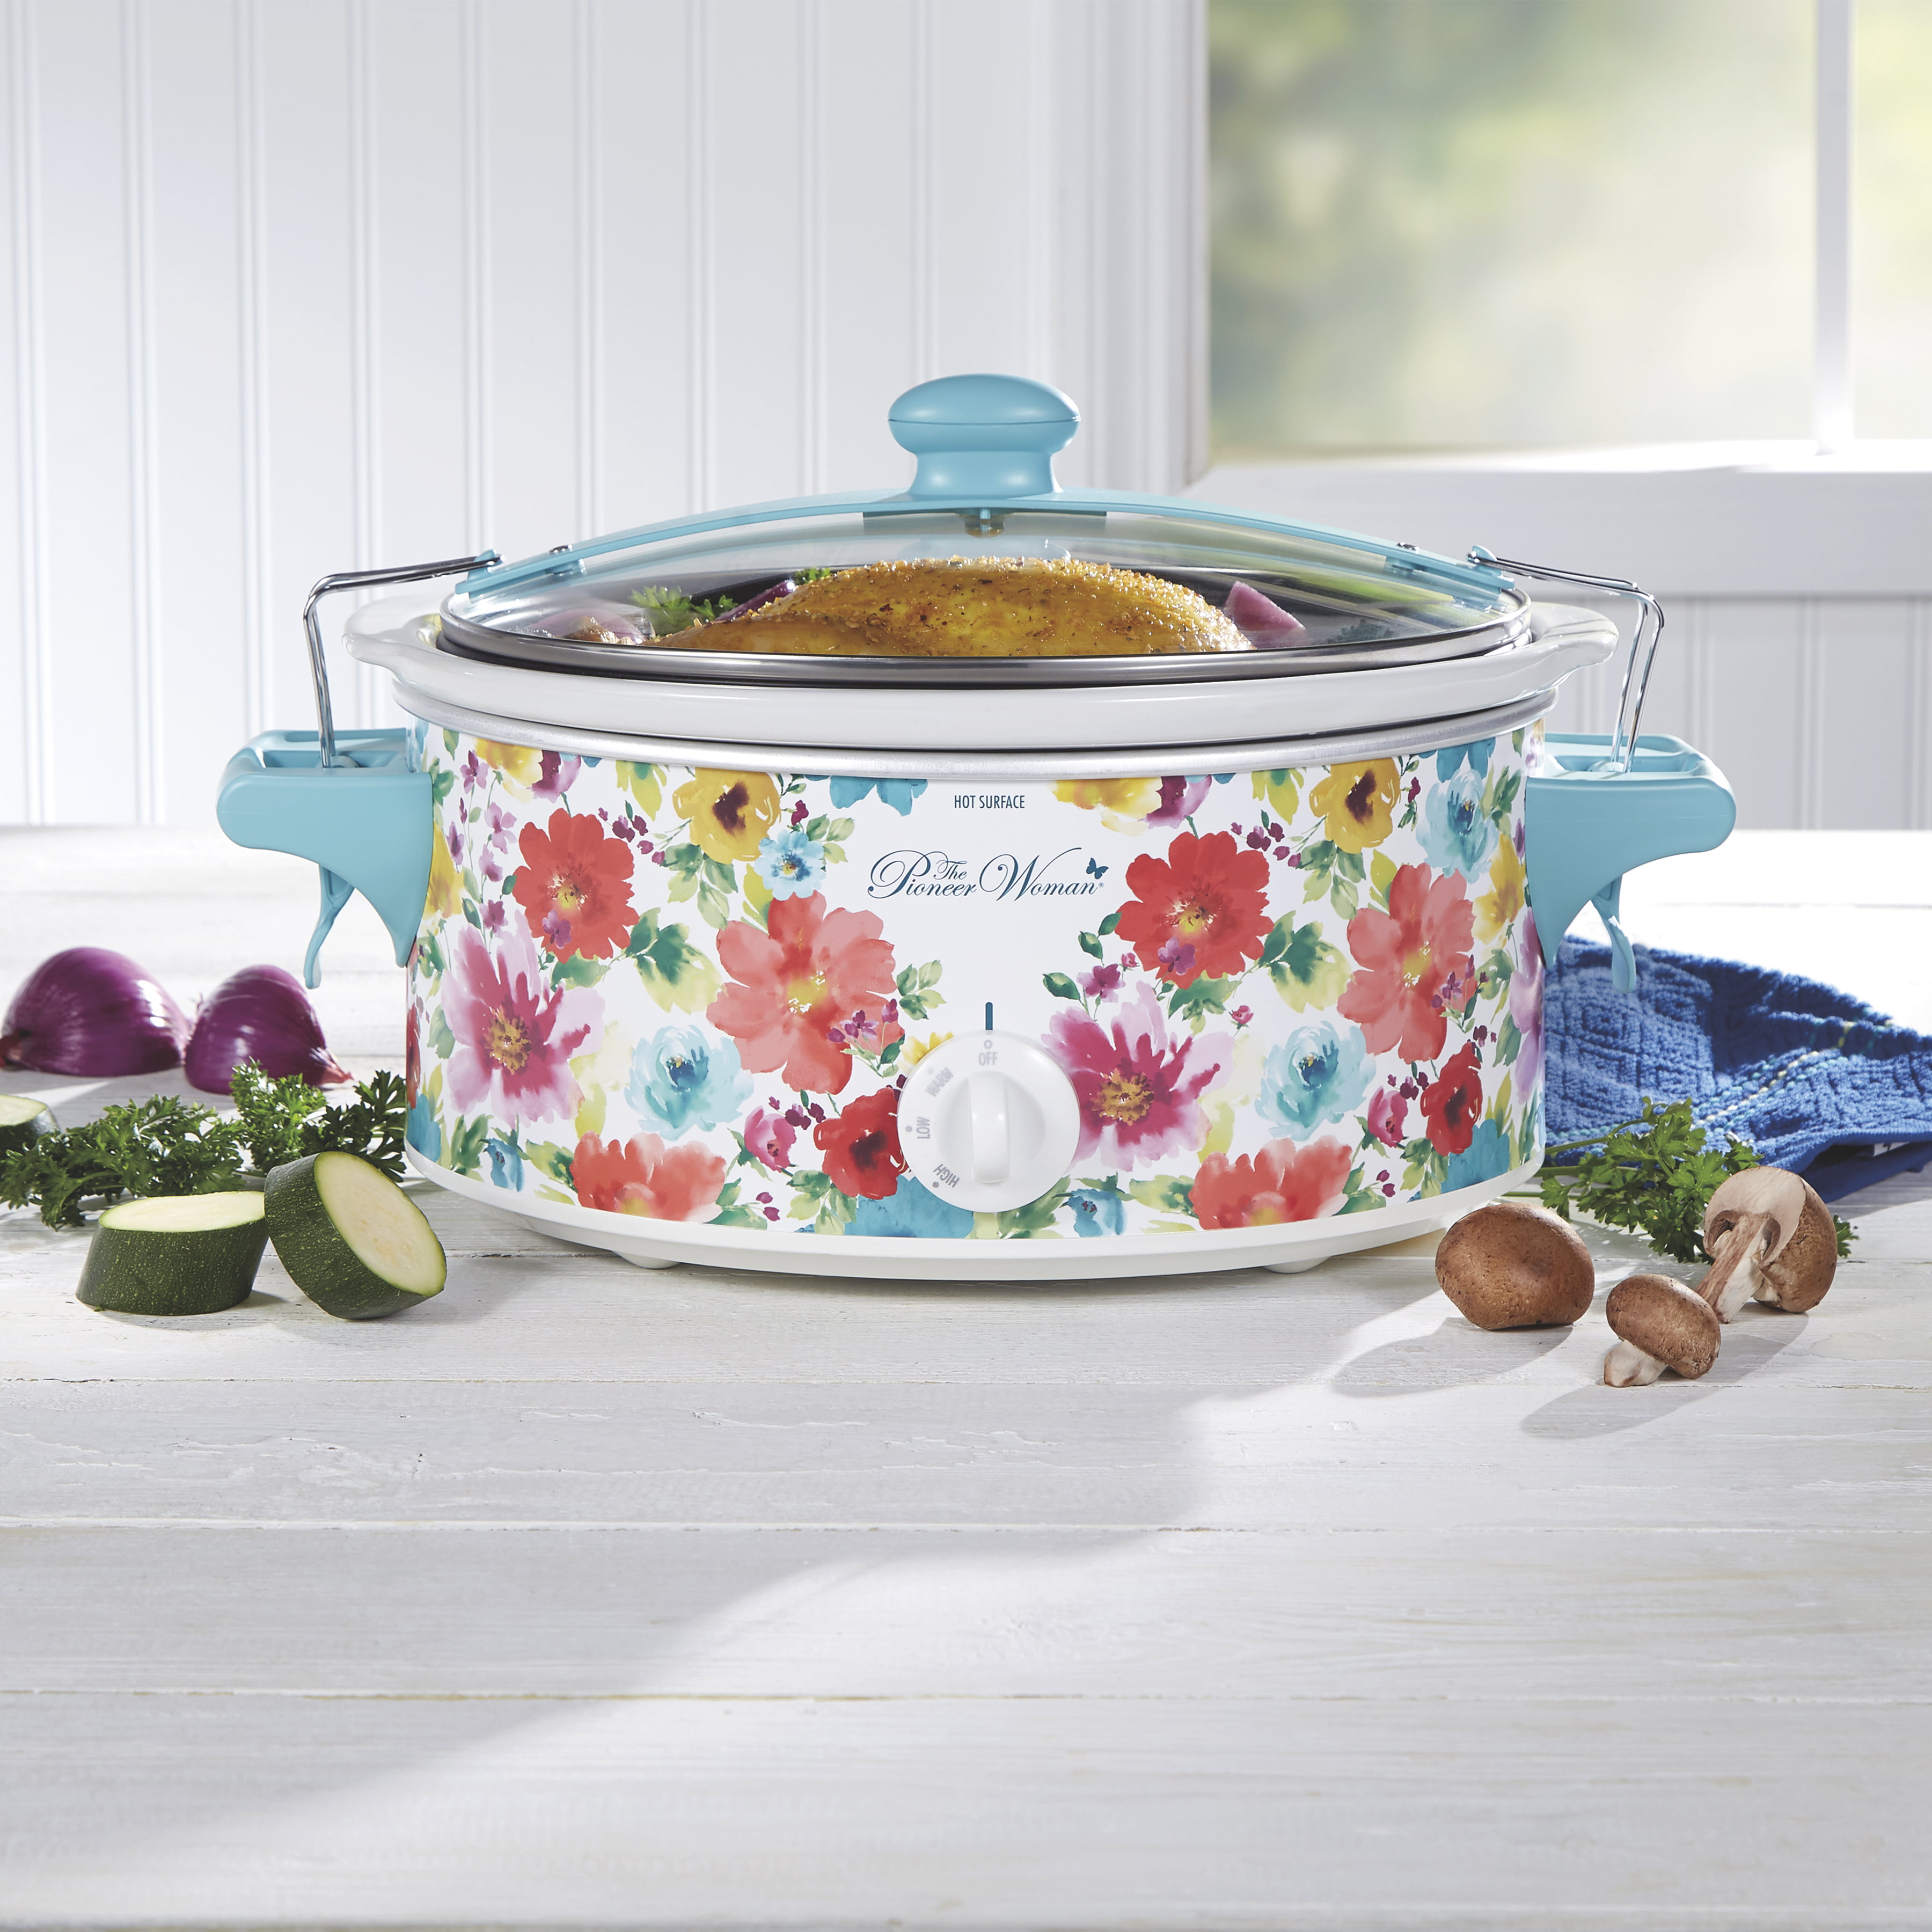 The Pioneer Woman Blossom Jubilee 5-Quart Portable Slow Cooker 